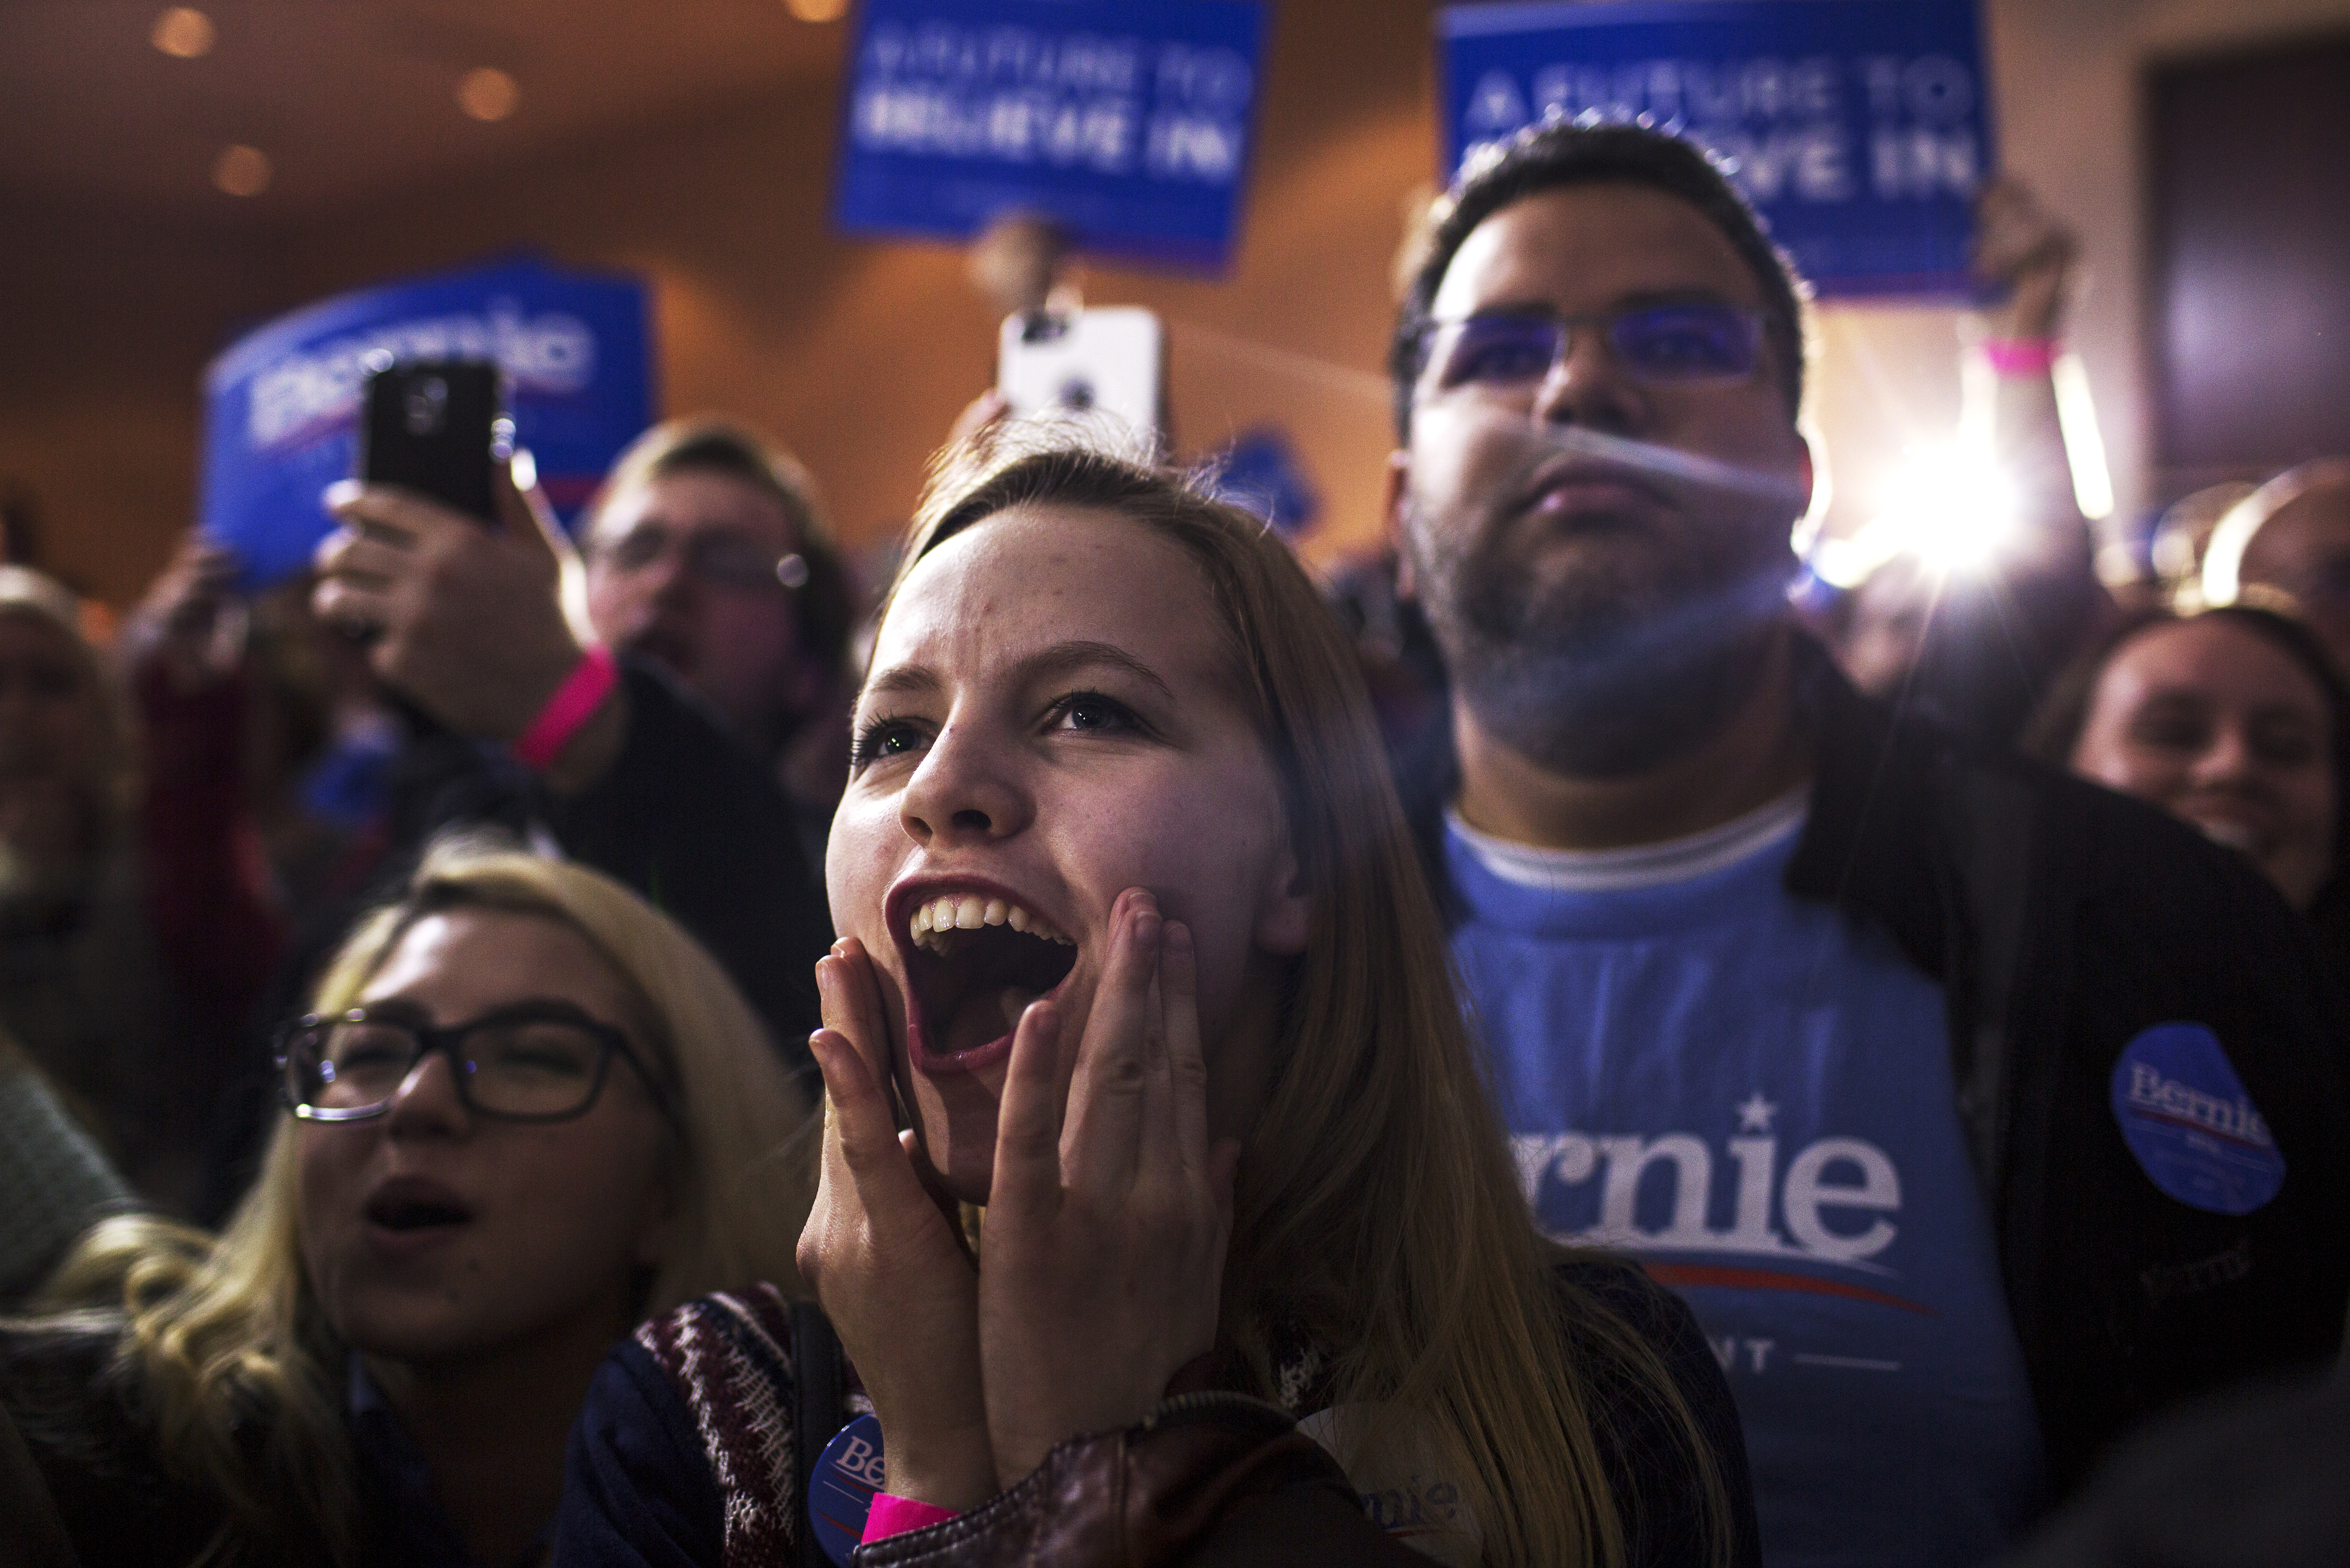 Supporters react during a caucus night party for Democratic presidential candidate, Vermont Sen. Bernie Sanders in Des Moines, Iowa on Feb. 1, 2016.